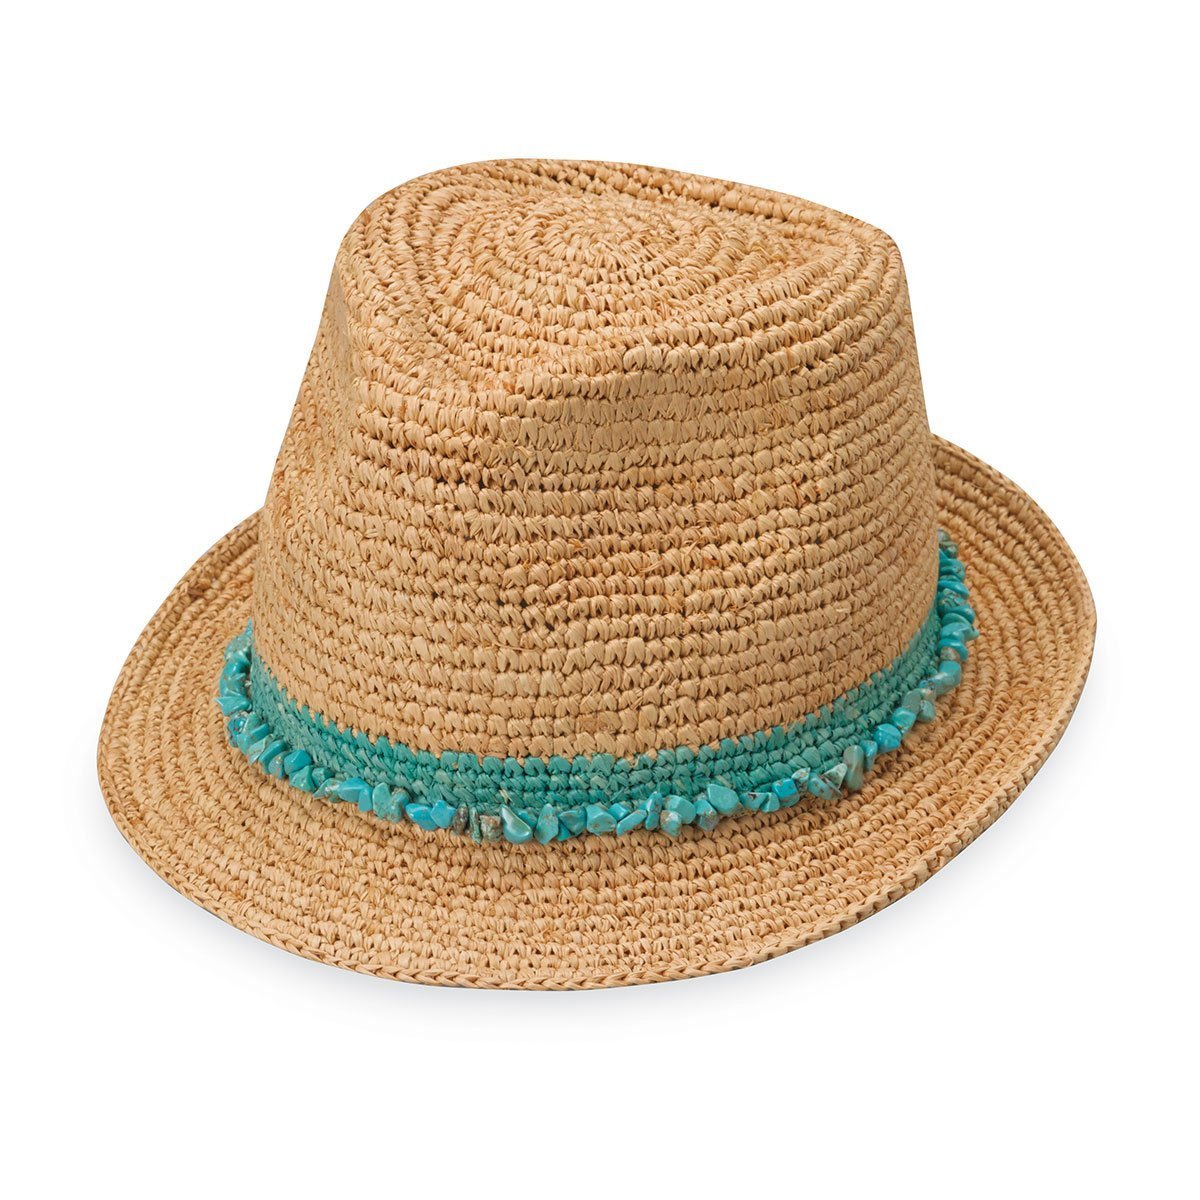 Featuring Ladies' Tahiti Straw Sun Hat for the beach in Turquoise from Wallaroo